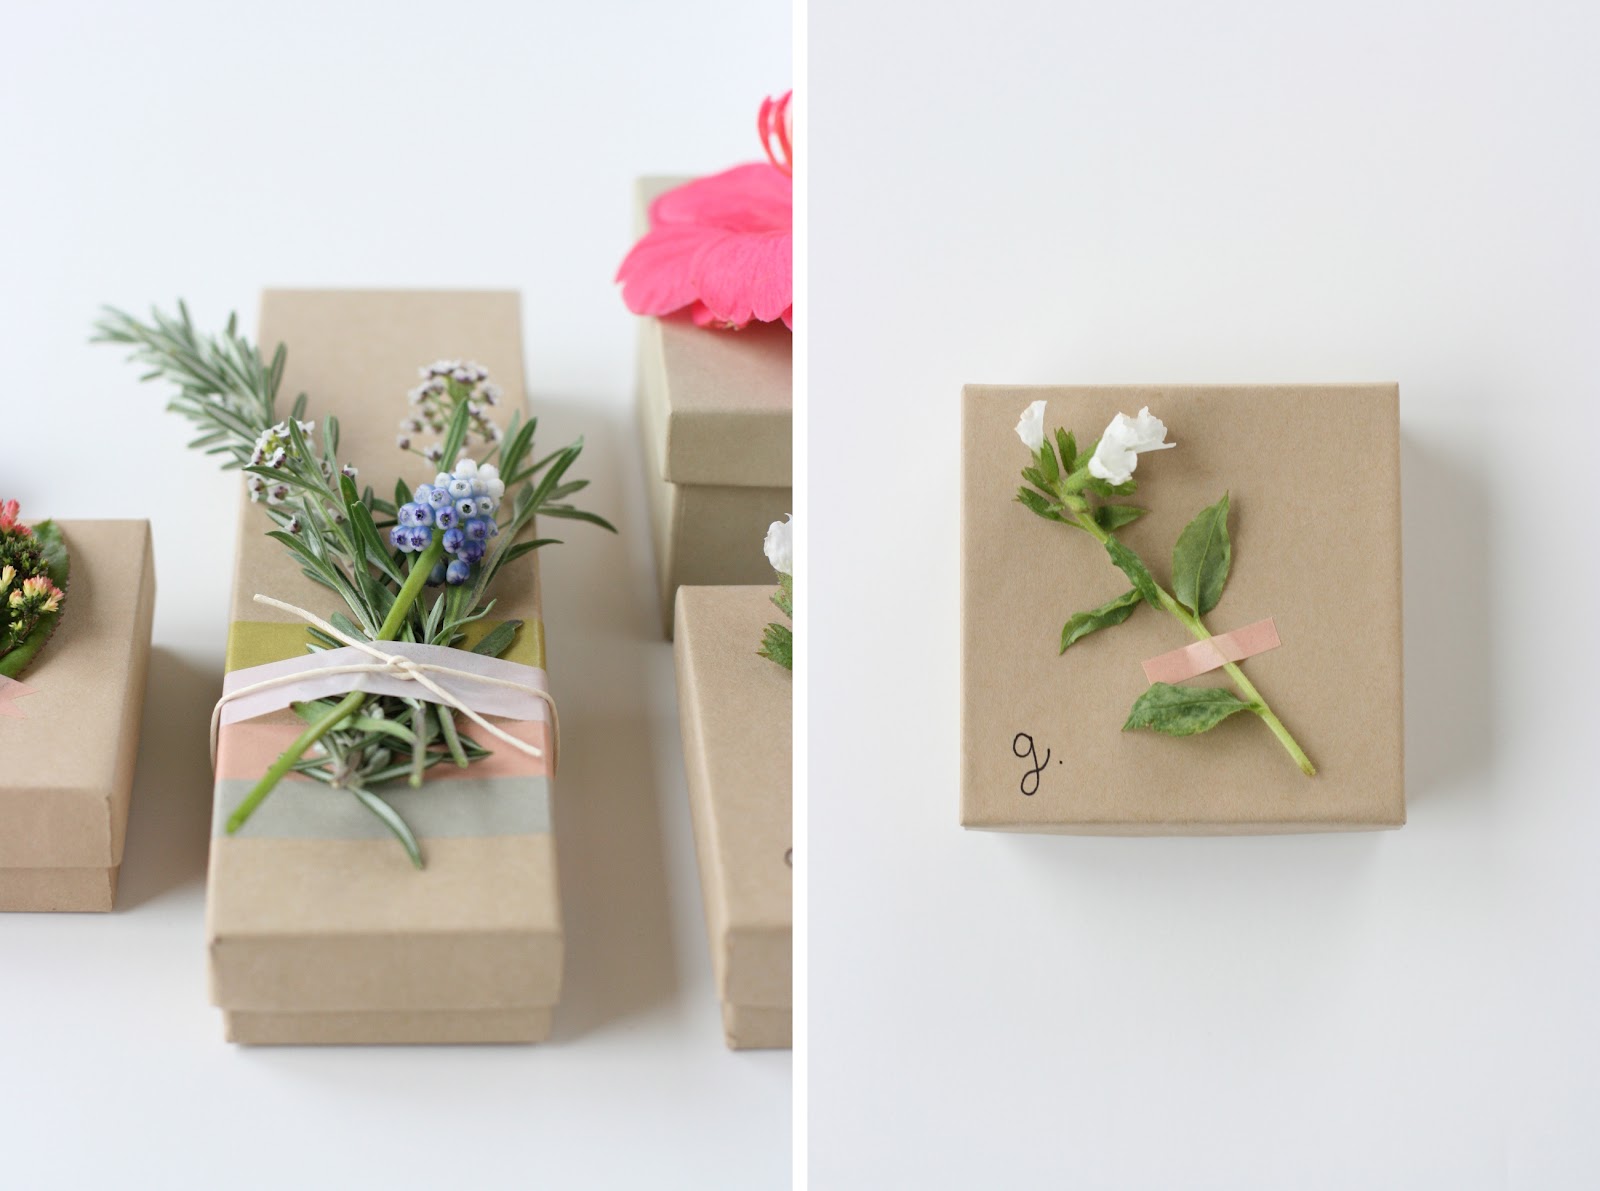 Paper Flower Gift Toppers 